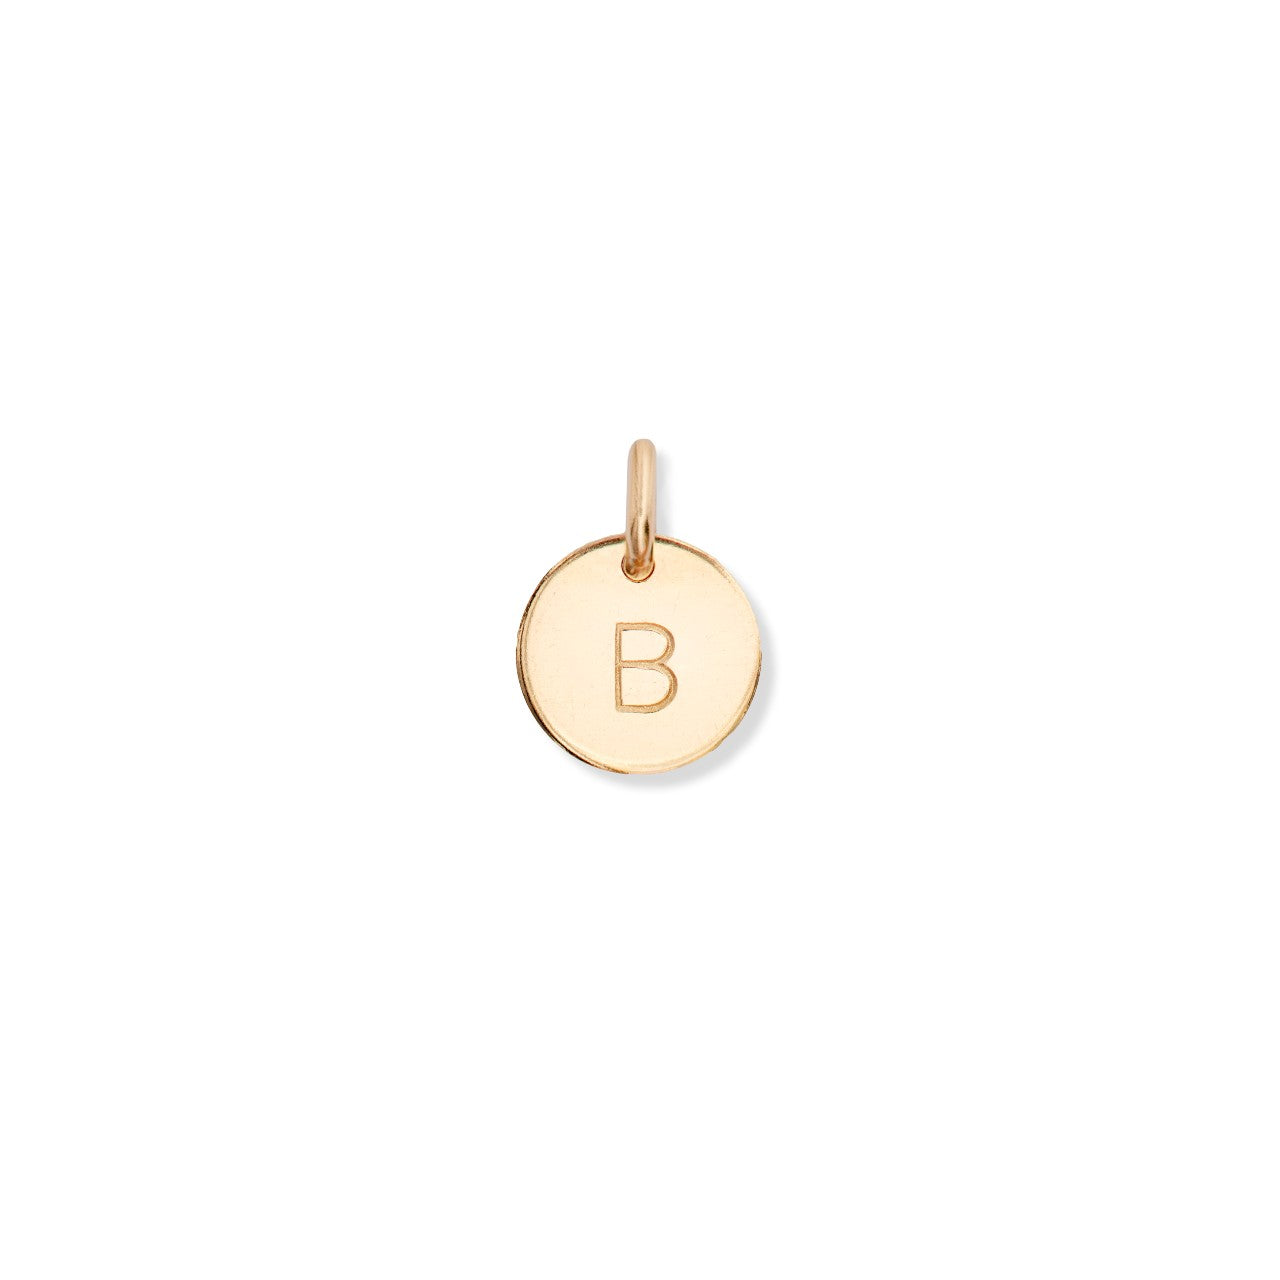 Additional Charm | Personalised Initial Disc (Gold Fill)